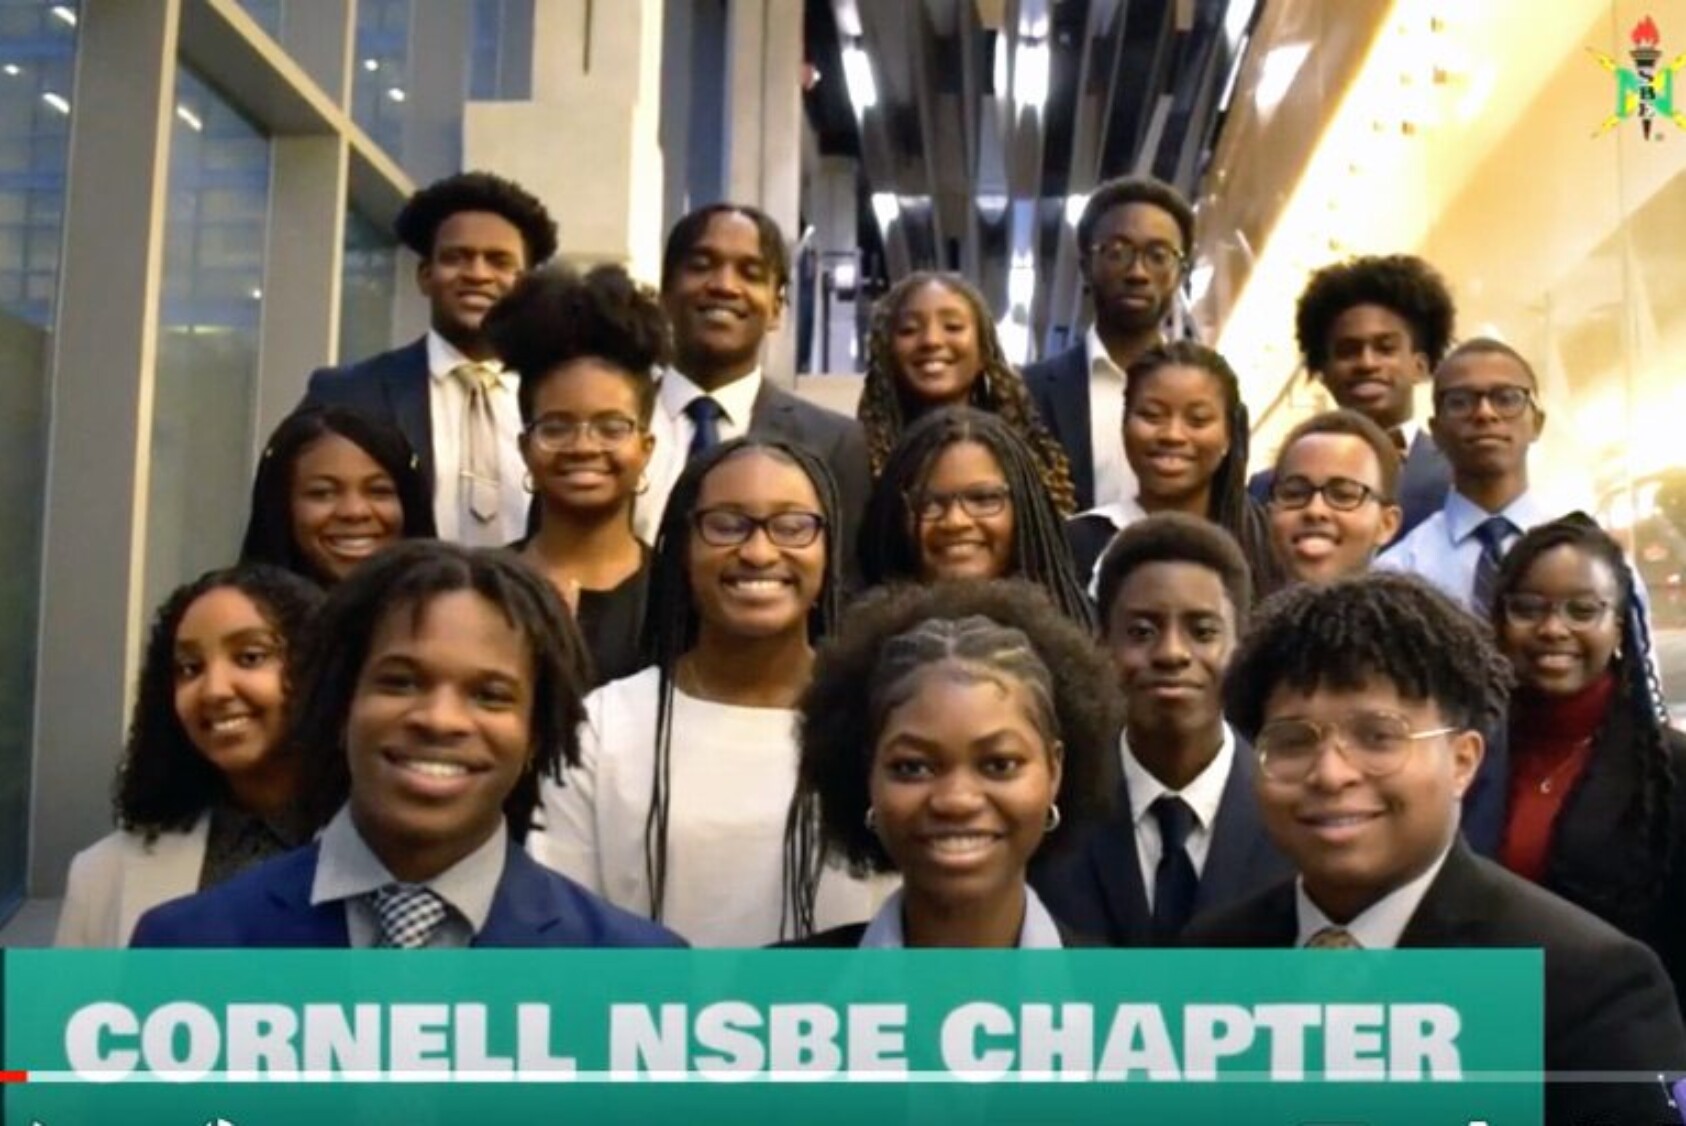 NSBE works to ensure the retention of Black engineers on campus. The group provides mentoring, tutoring, networking, scholarships, and leadership opportunities to its members in engineering, science, and tech fields.